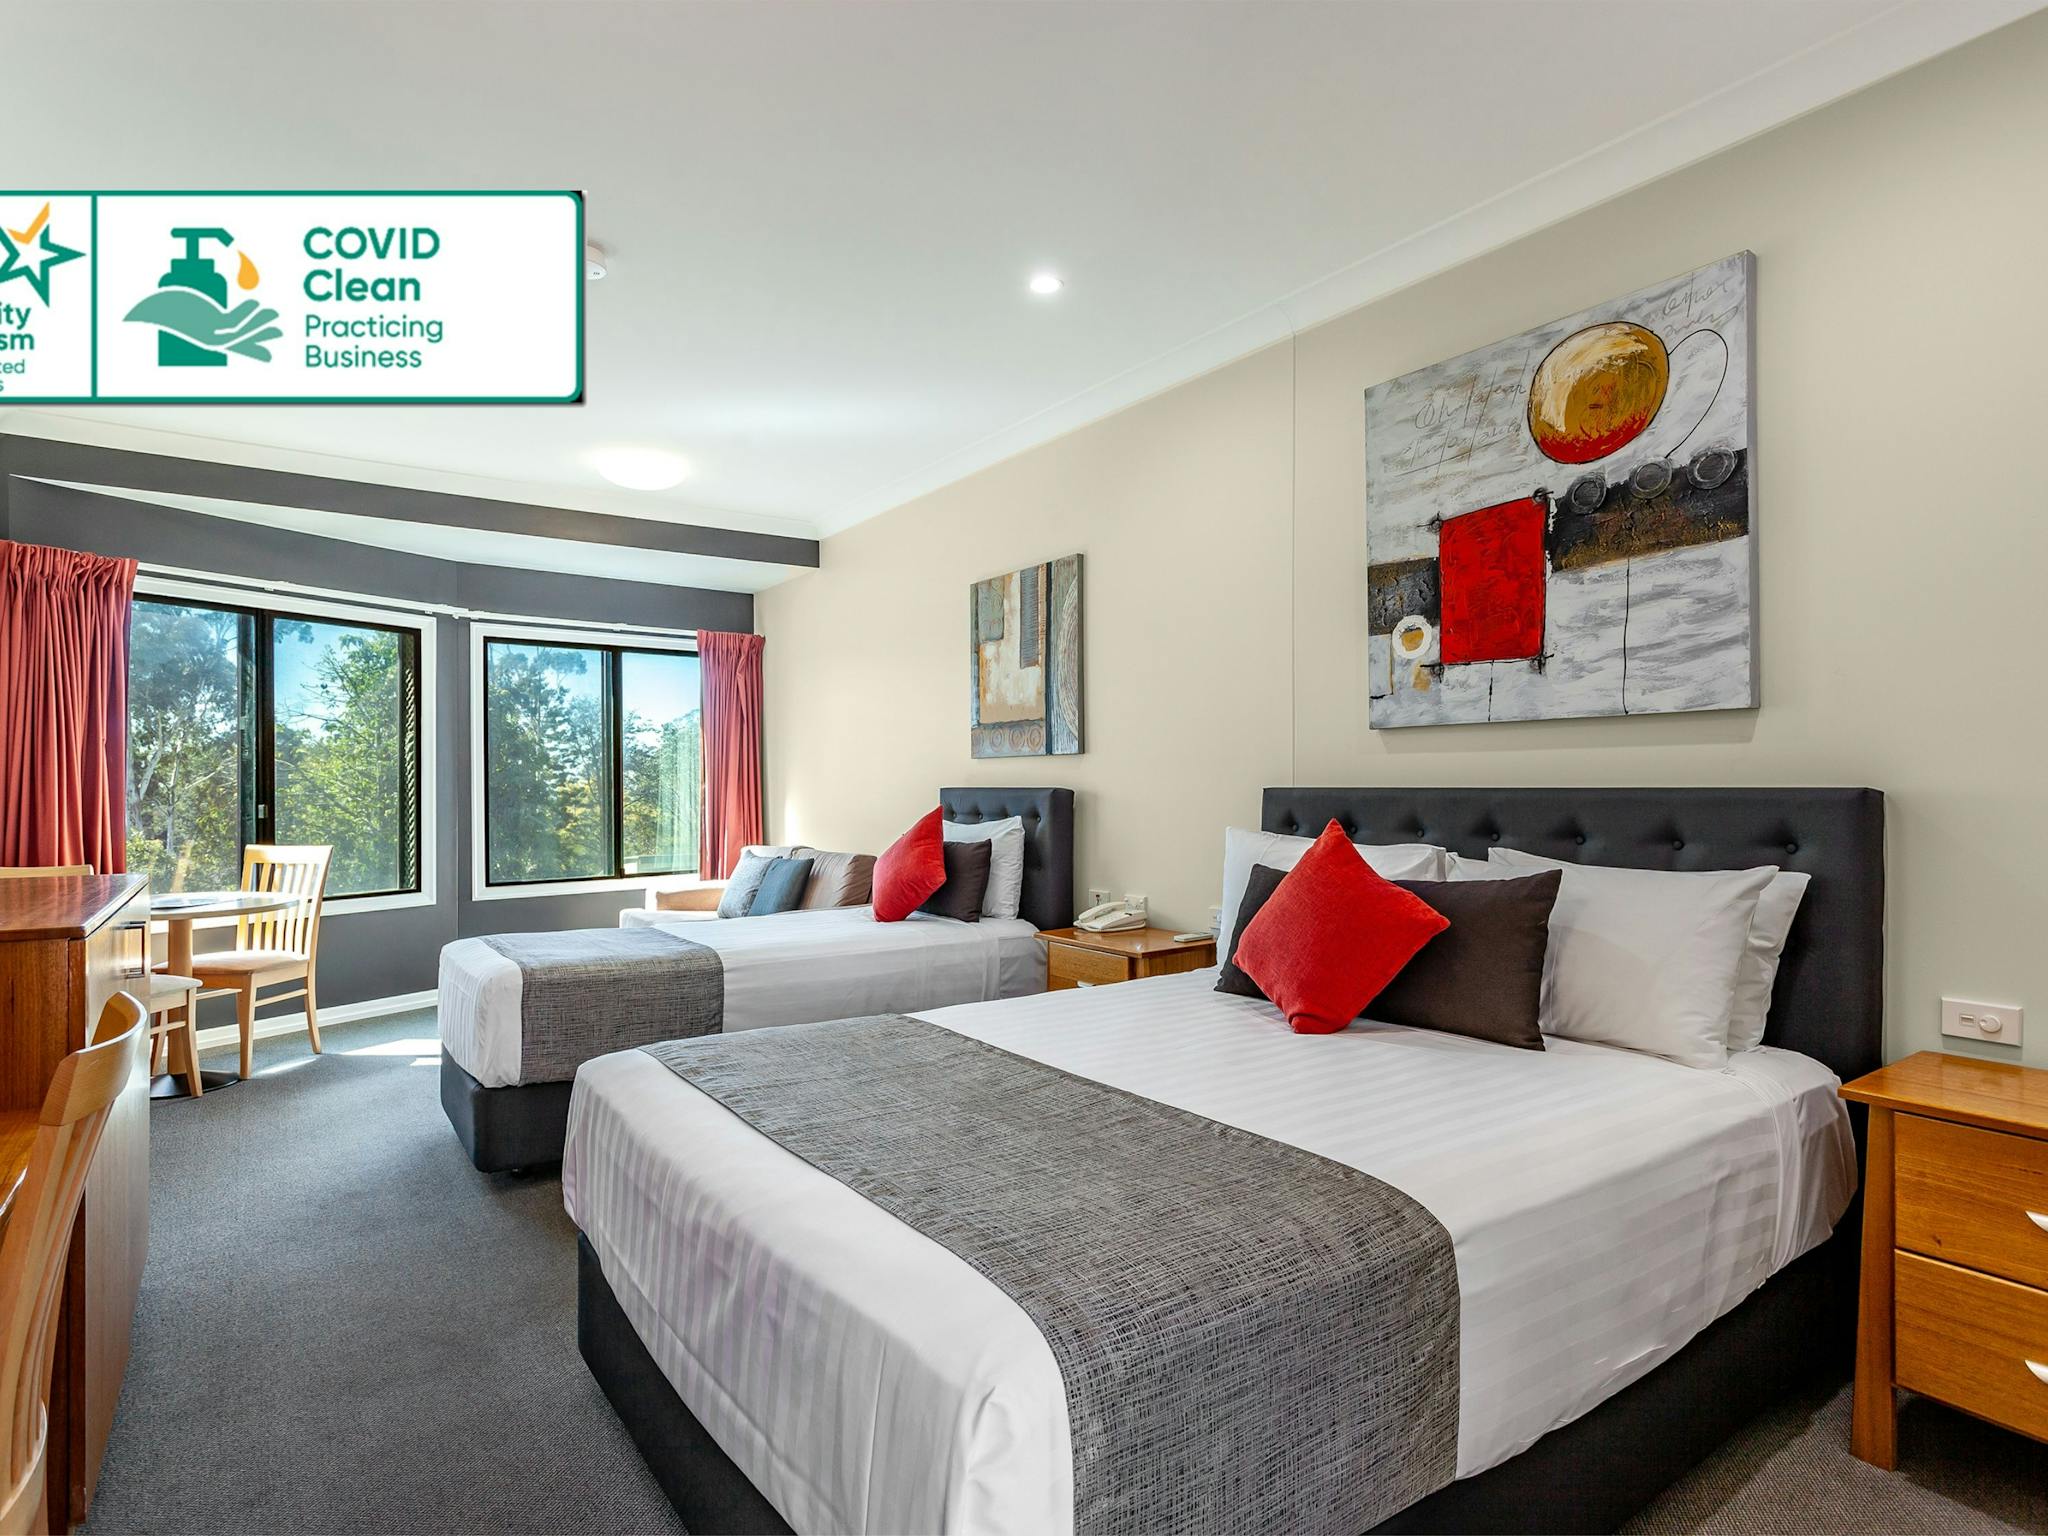 COVID Safe Certified Rooms